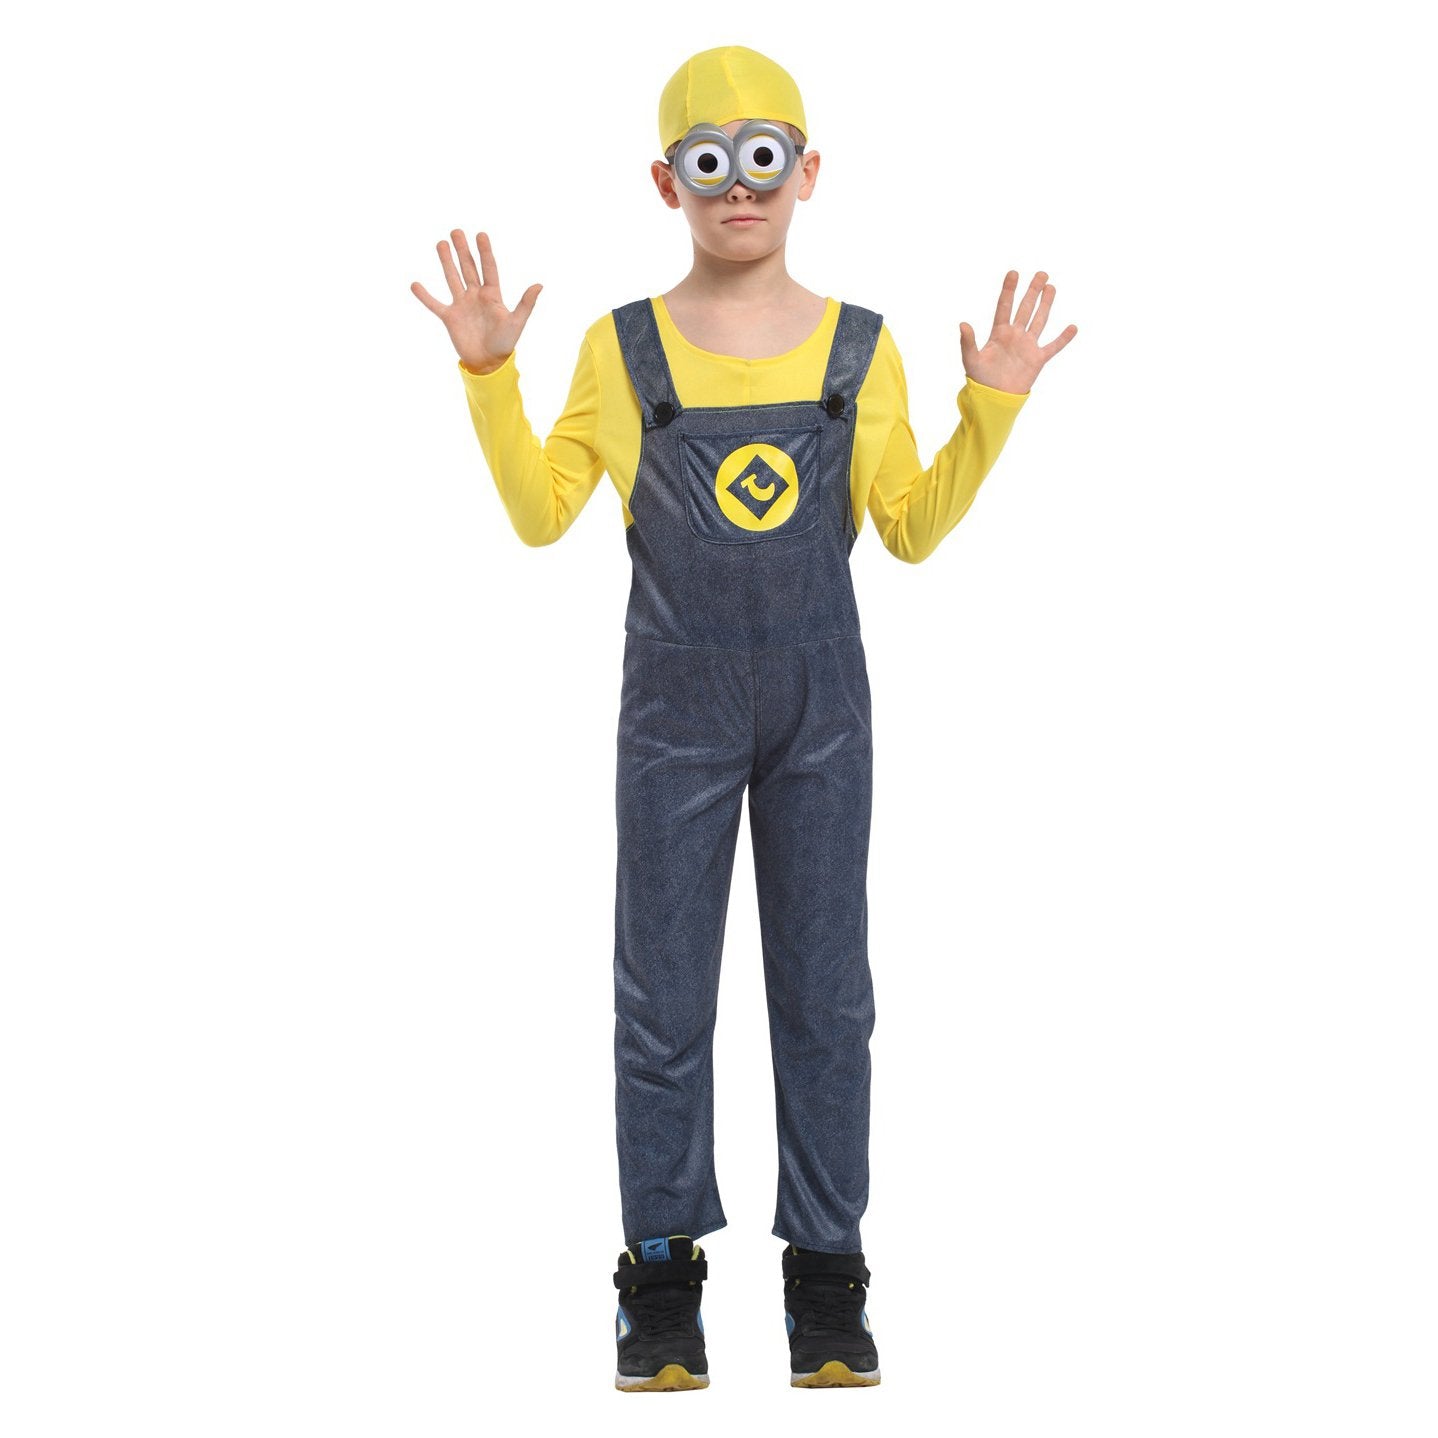 Minions Masquerade Costumes Performance Stage Cosplay Costume for Kids-Pajamasbuy